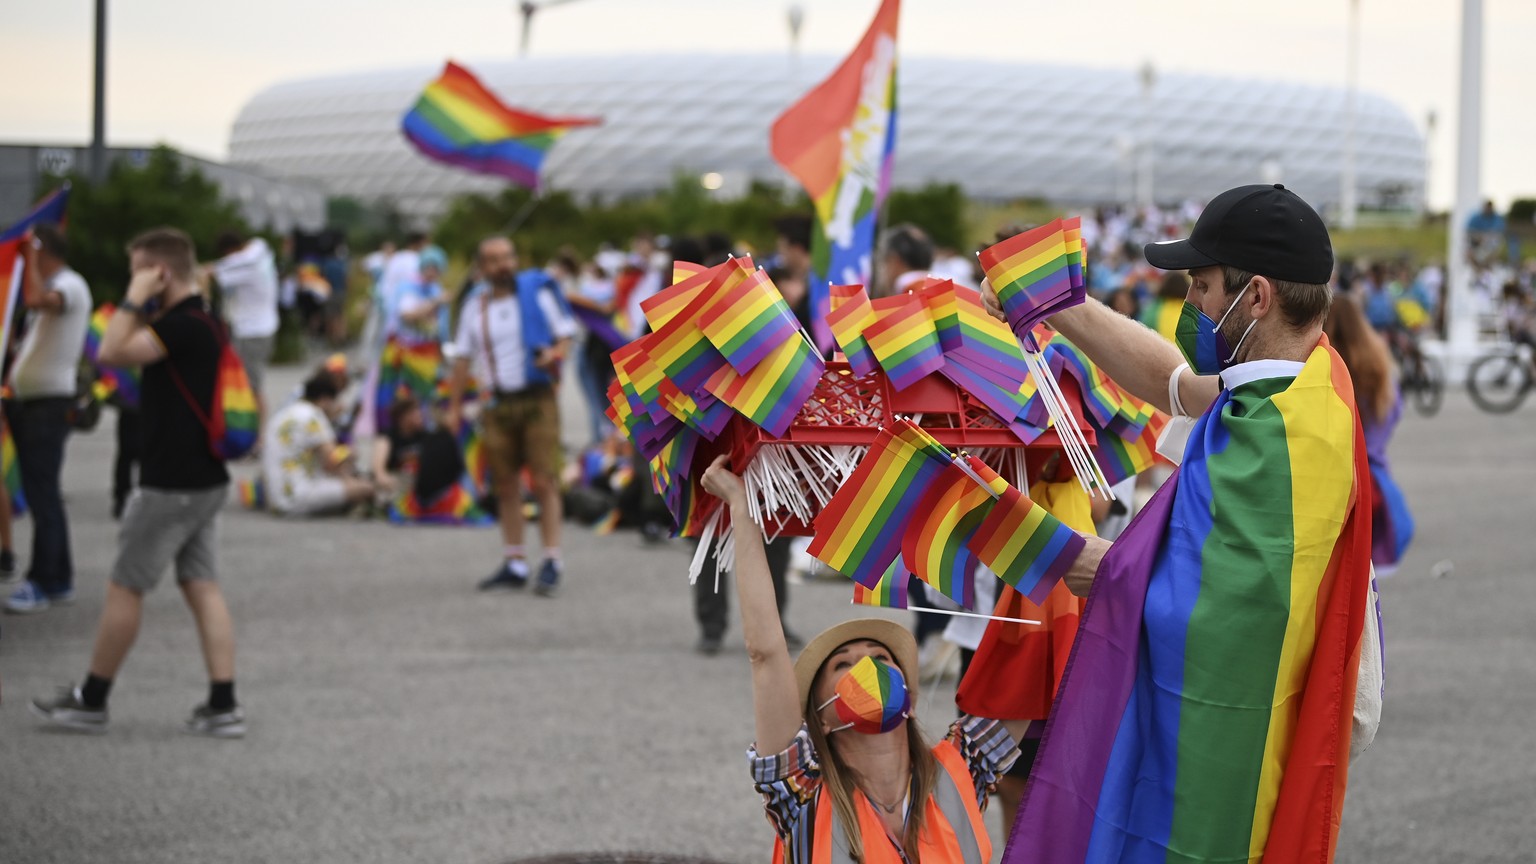 epa09296425 People prepare rainbow flags to hand out in front of the Allianz Arena stadium in Munich, Germany, 23 June 2021. The UEFA on 22 June turned down a request by the city of Munich to illumina ...